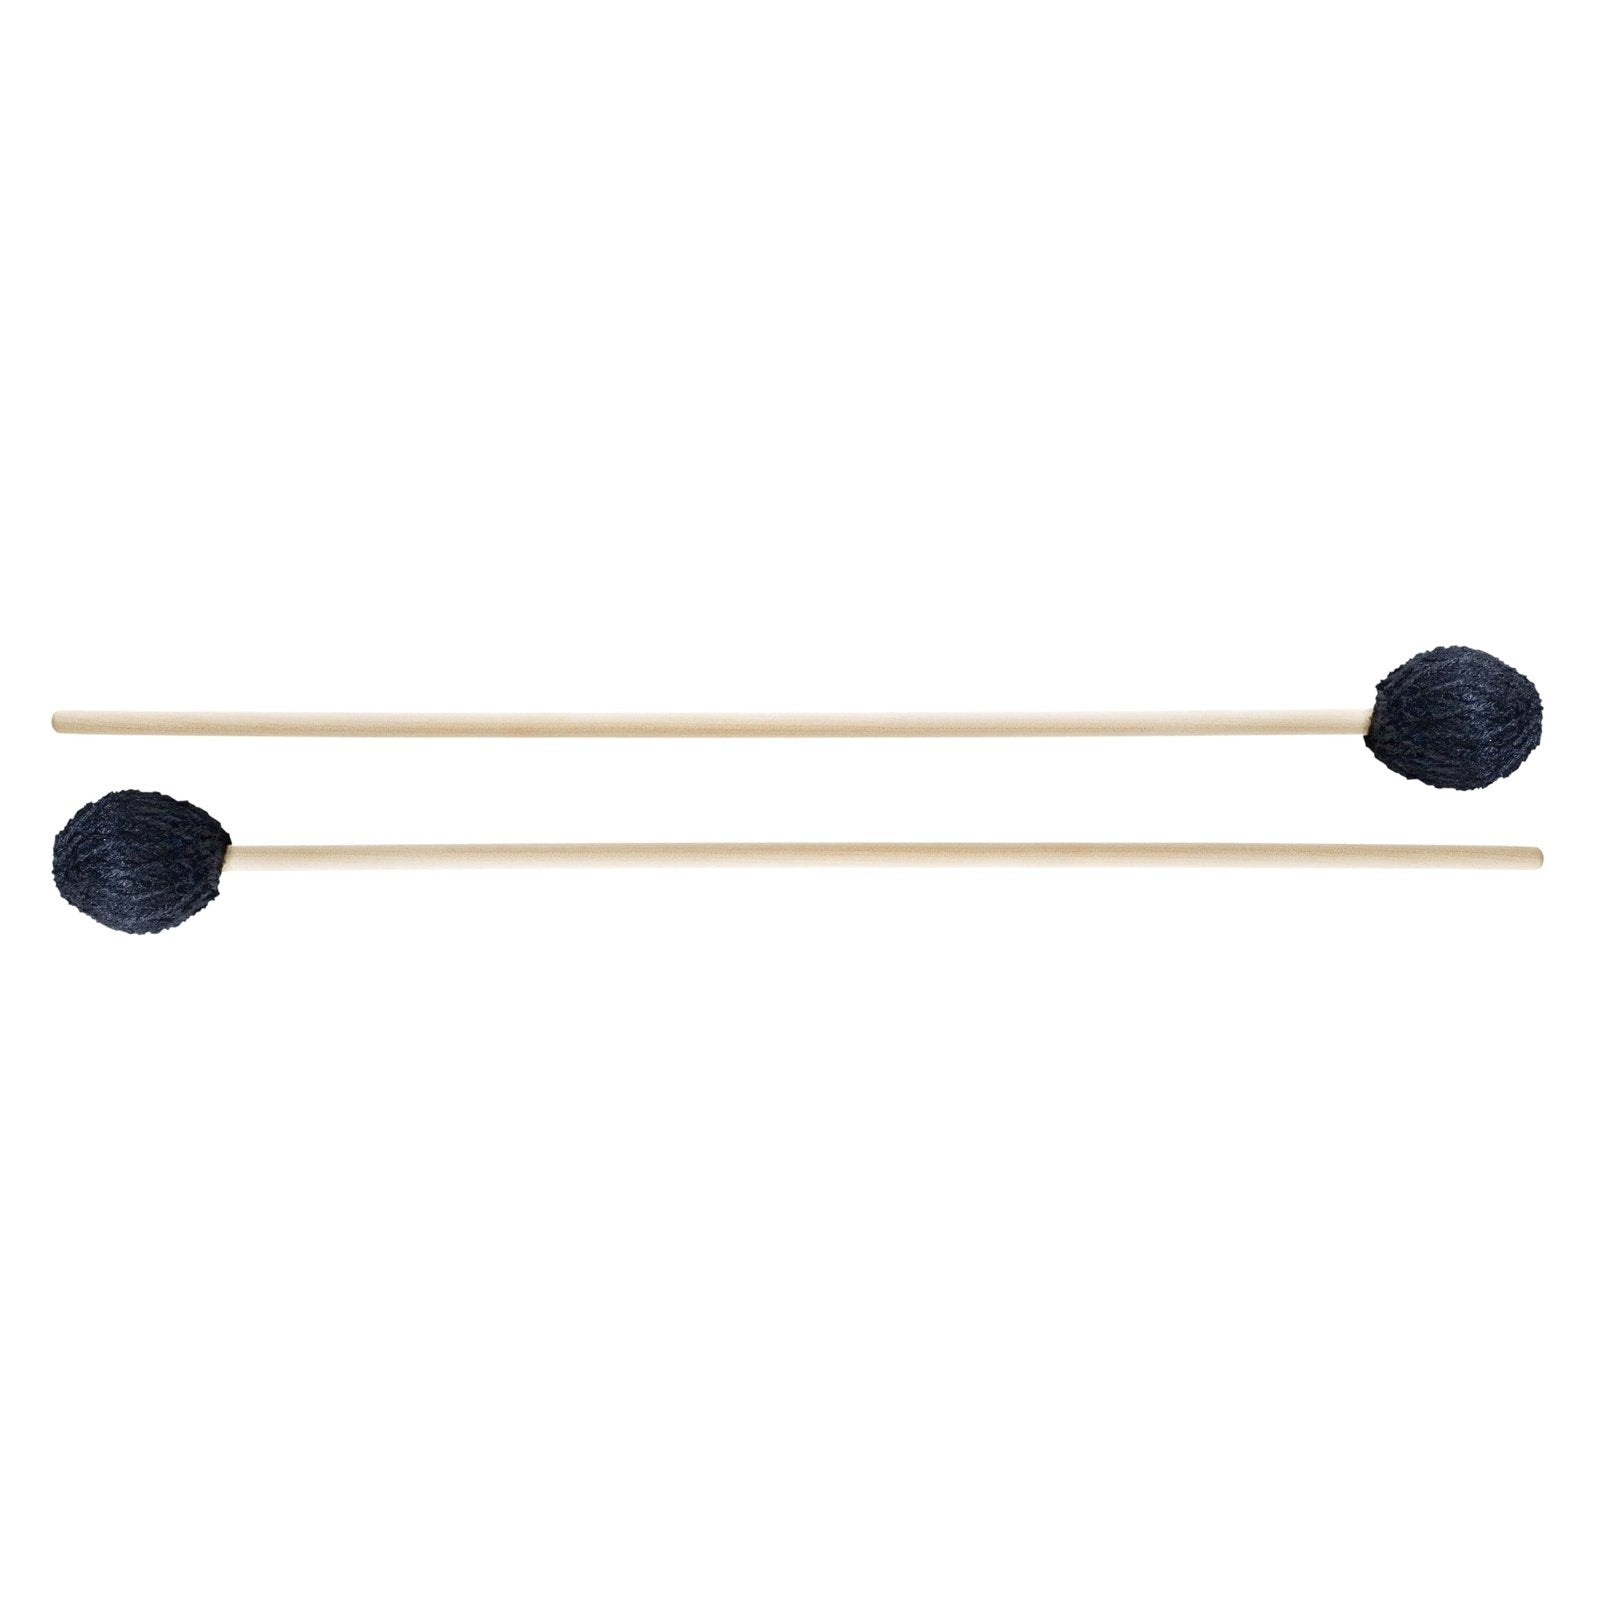 Bass drum Marching Mallets PERFORMER - PROMARK